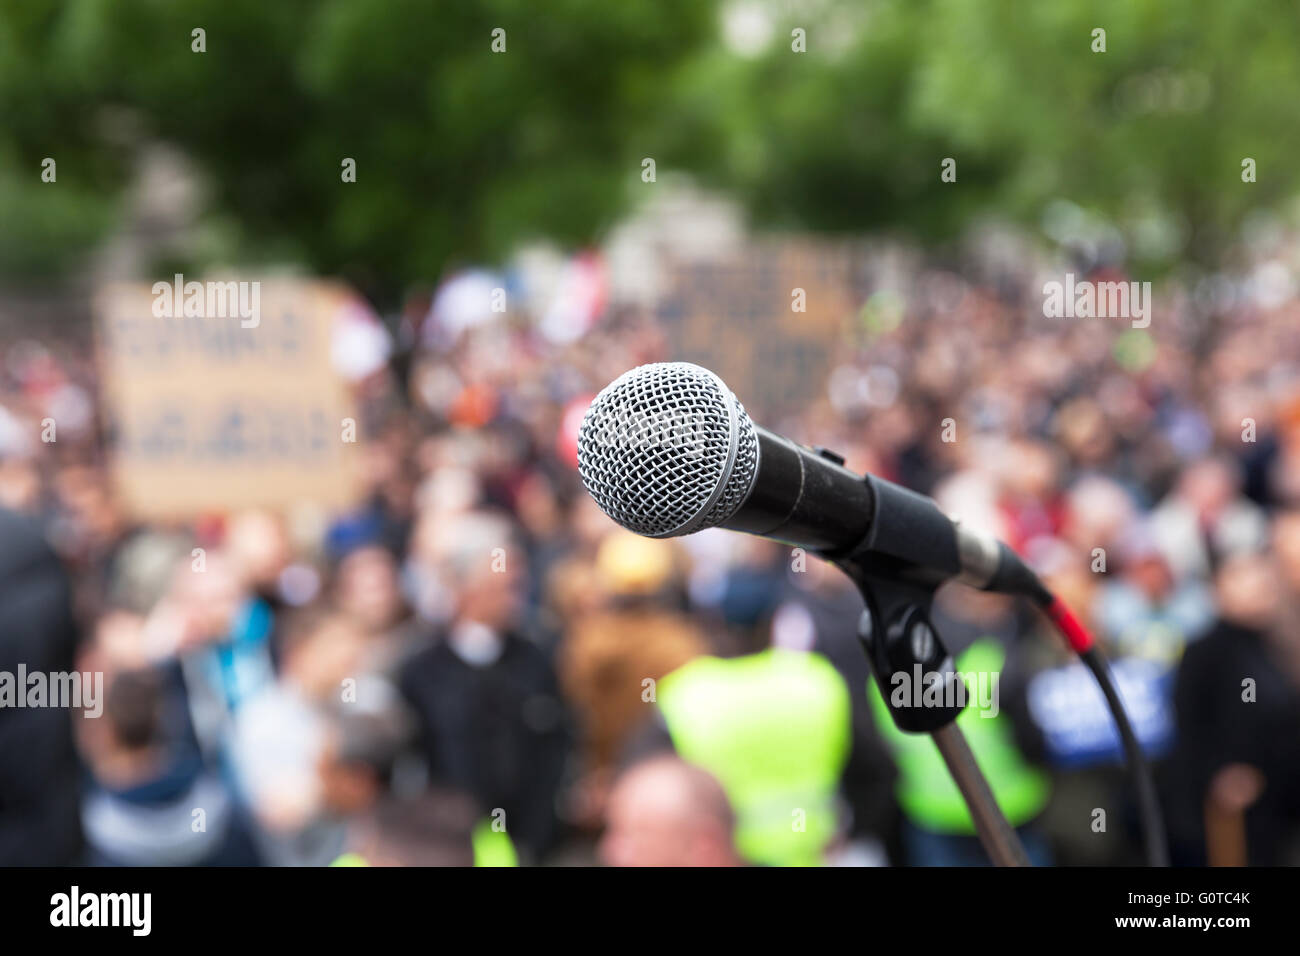 Microphone in focus against blurred crowd. Political rally. Stock Photo